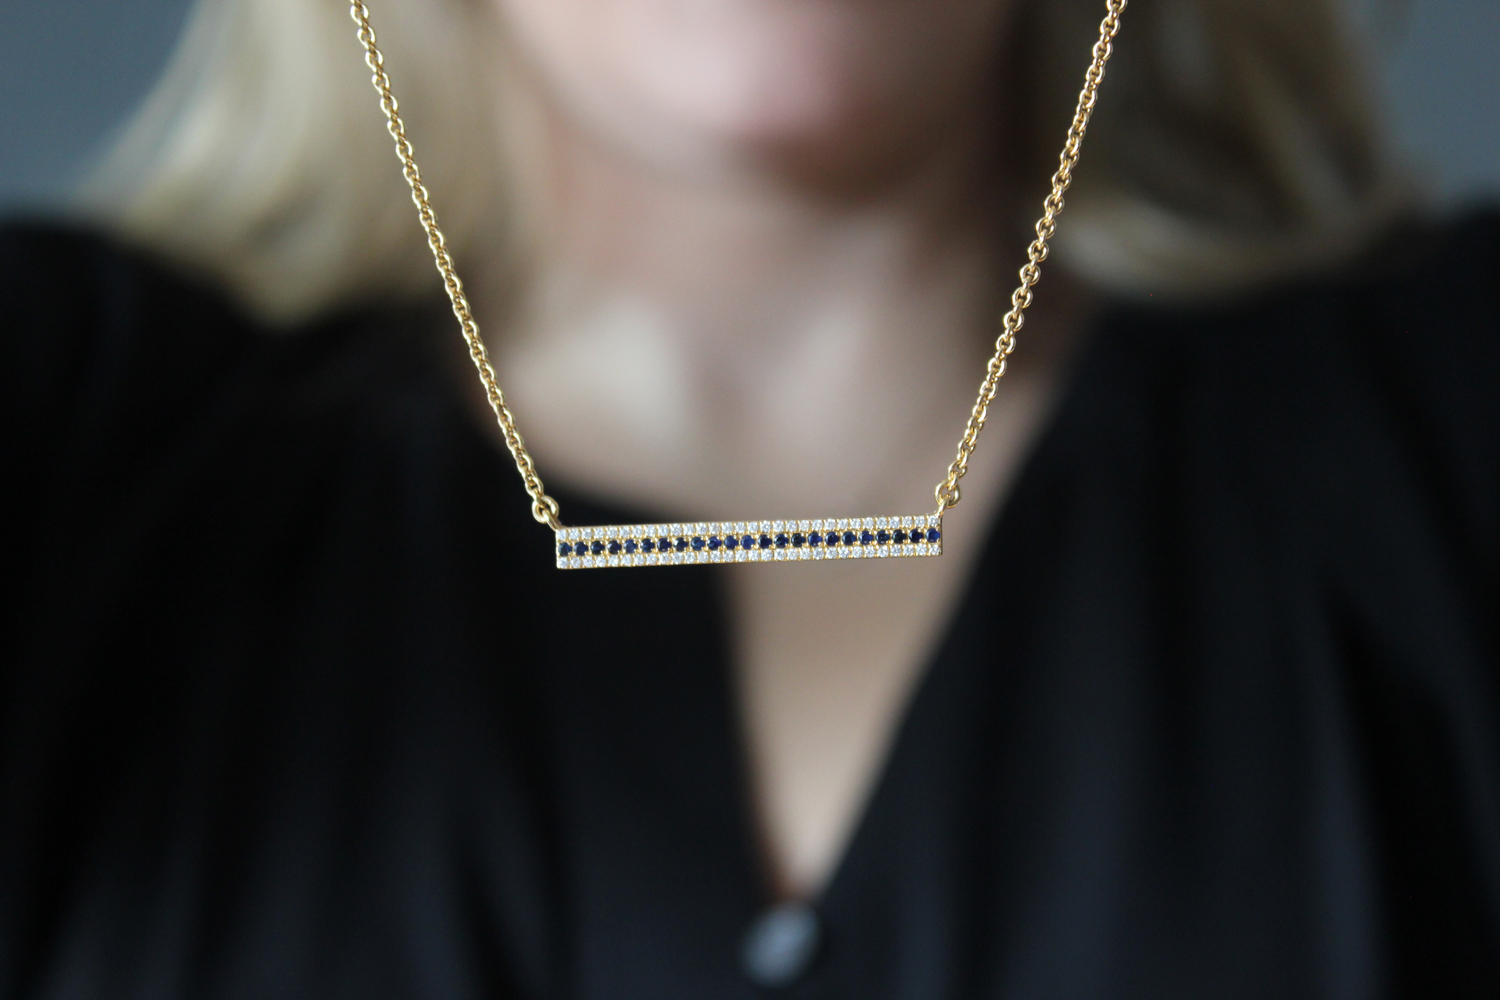 An 18-karat yellow gold diamond and sapphire bar necklace made by Synenberg.